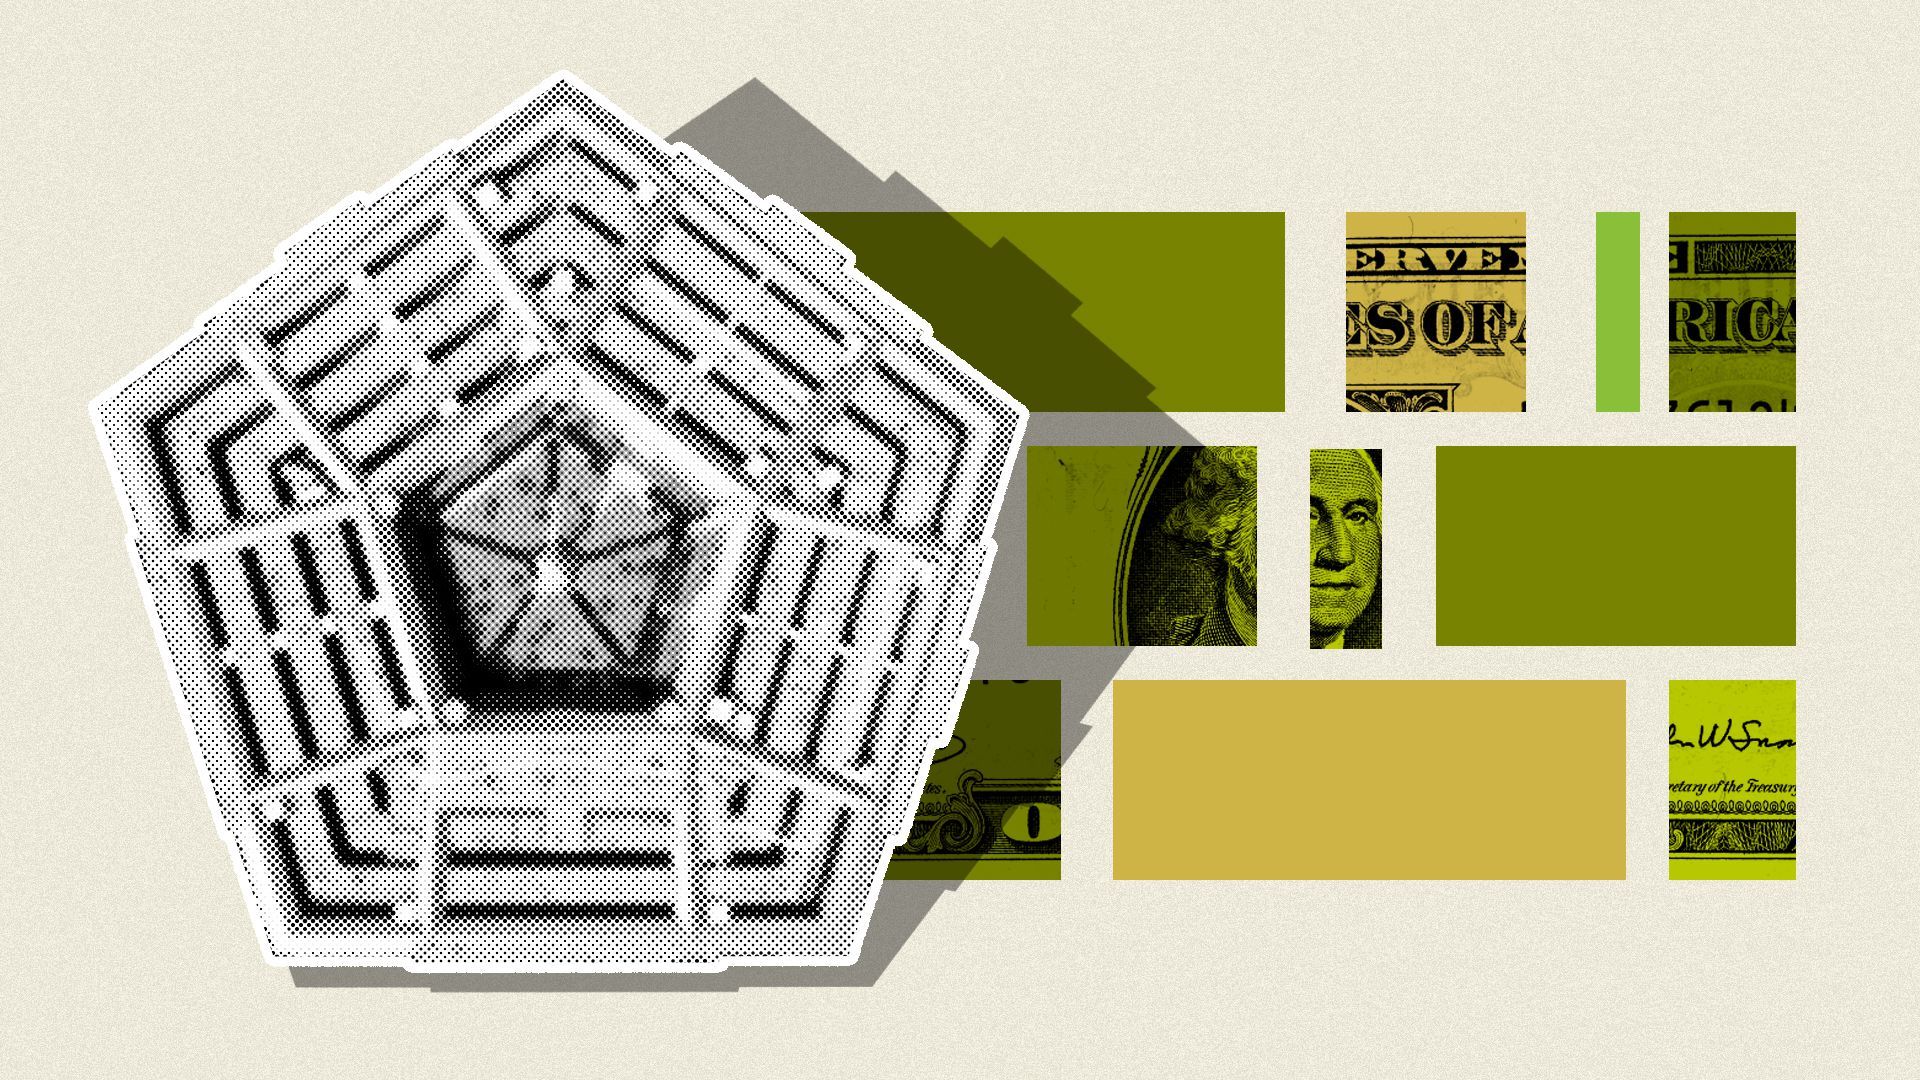 Illustration of the Pentagon with pieces of a dollar next to it